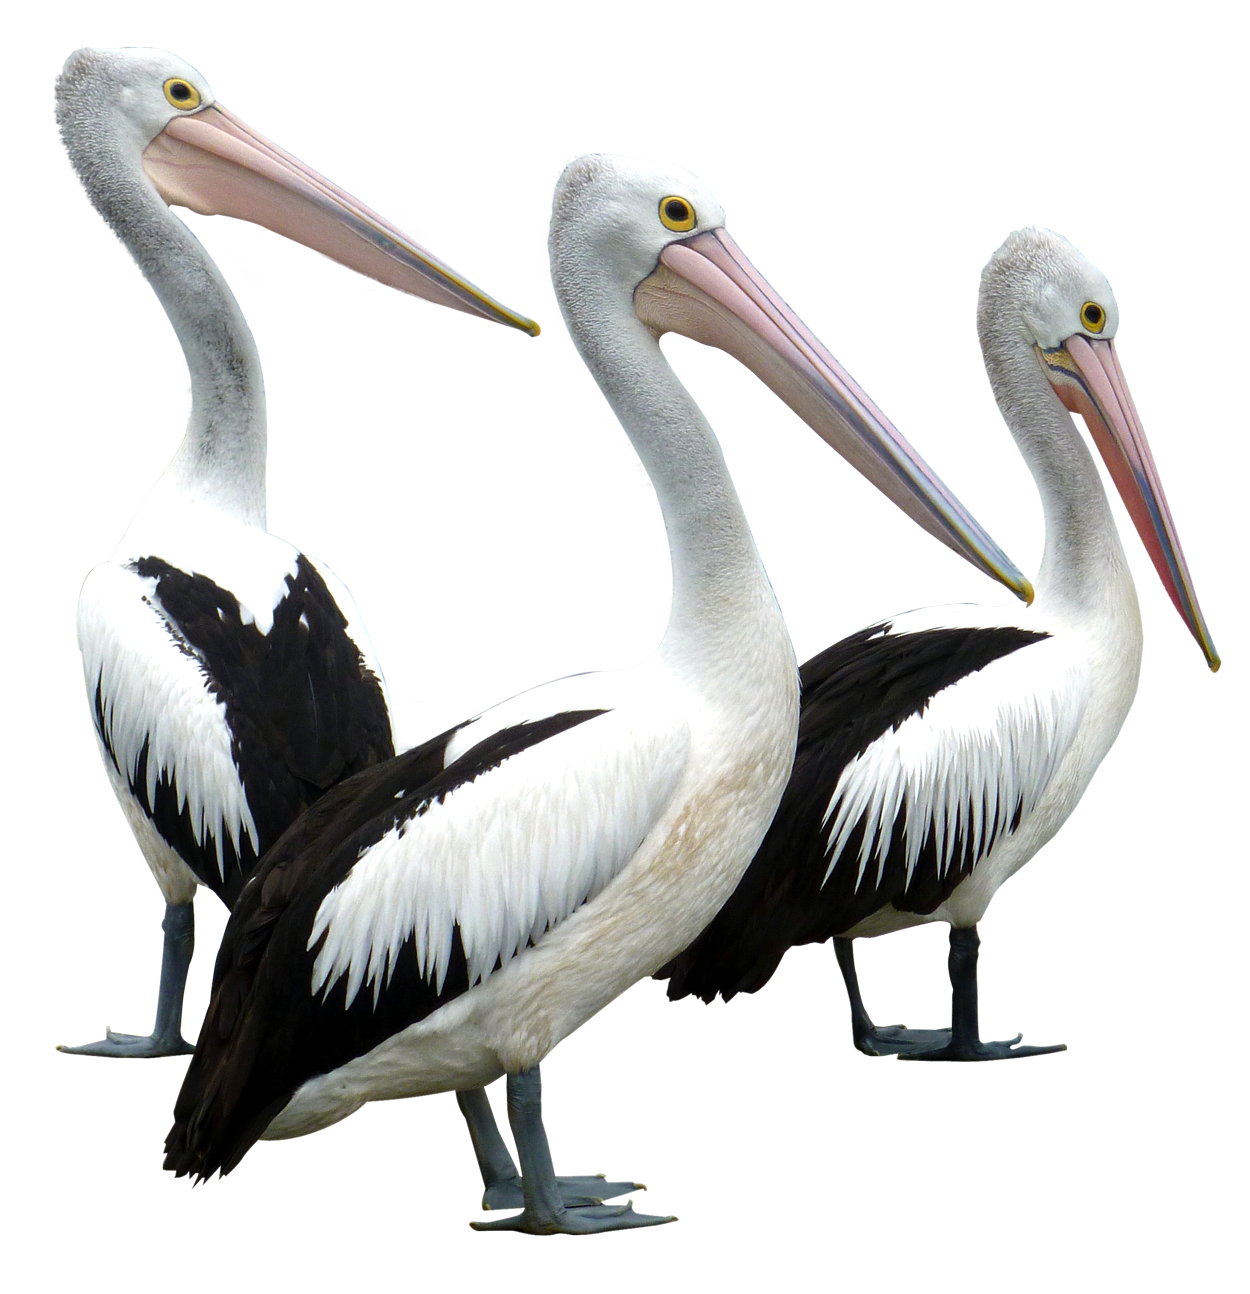 A Group Of Pelicans With Long Beaks